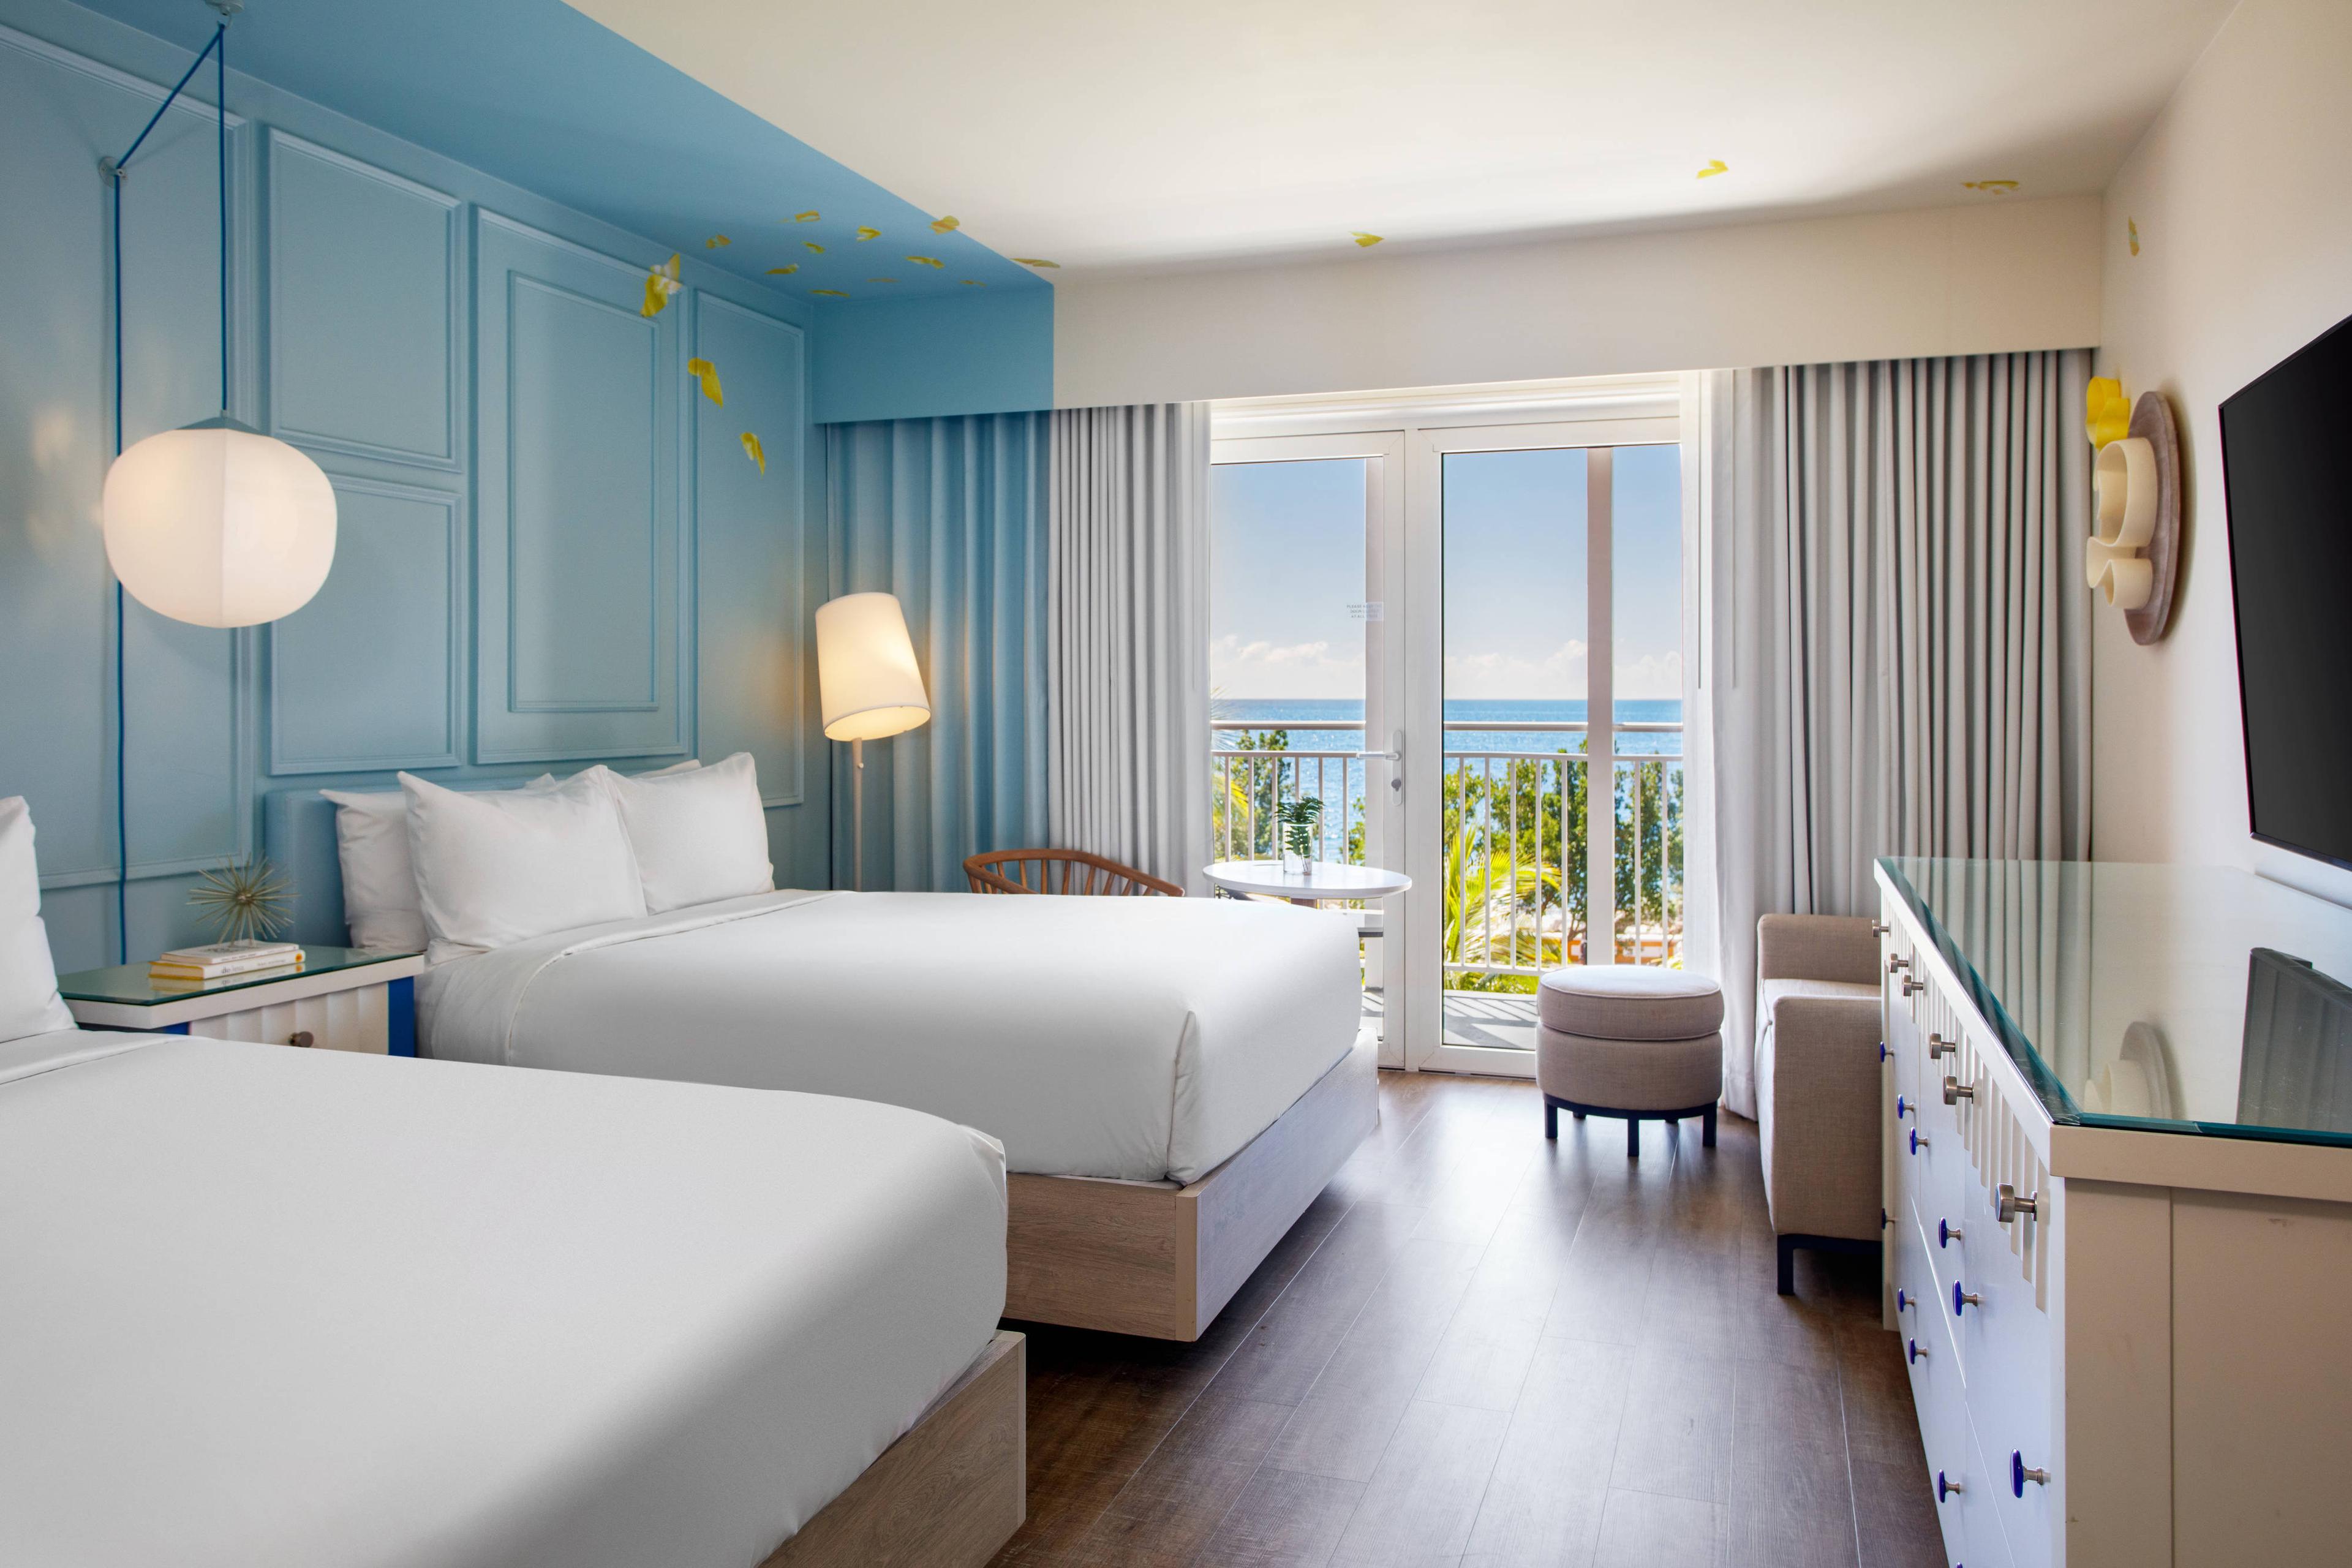 Experience breathtaking ocean views from our modern, newly renovated guestrooms